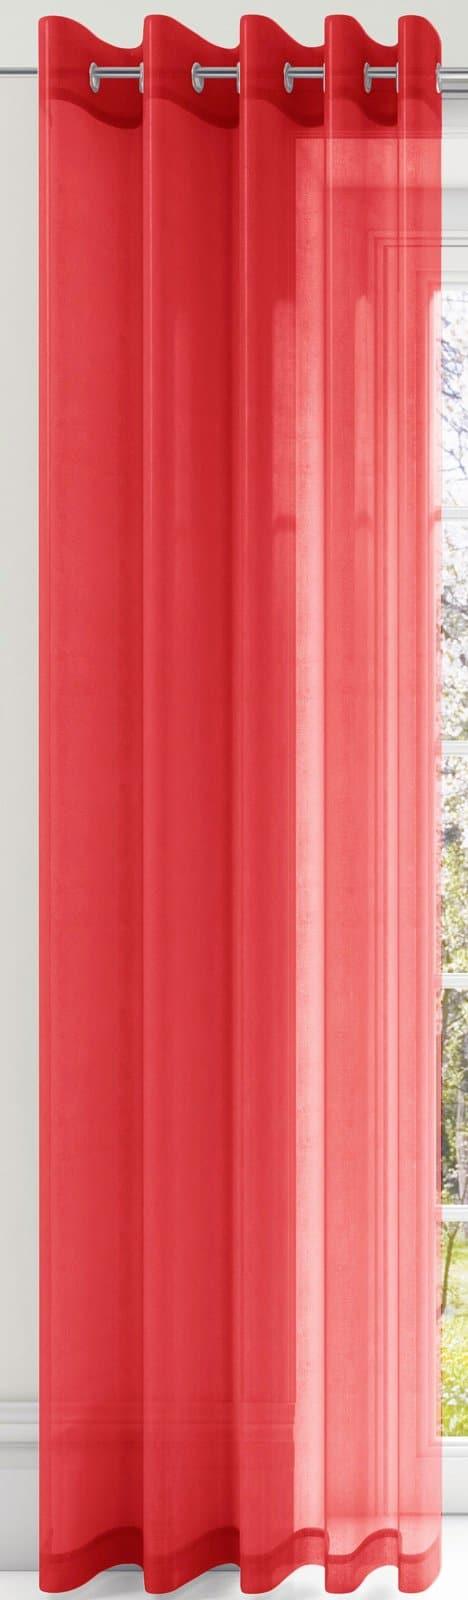 Plain Eyelet Voile Curtain Panels Red -  - Ideal Textiles